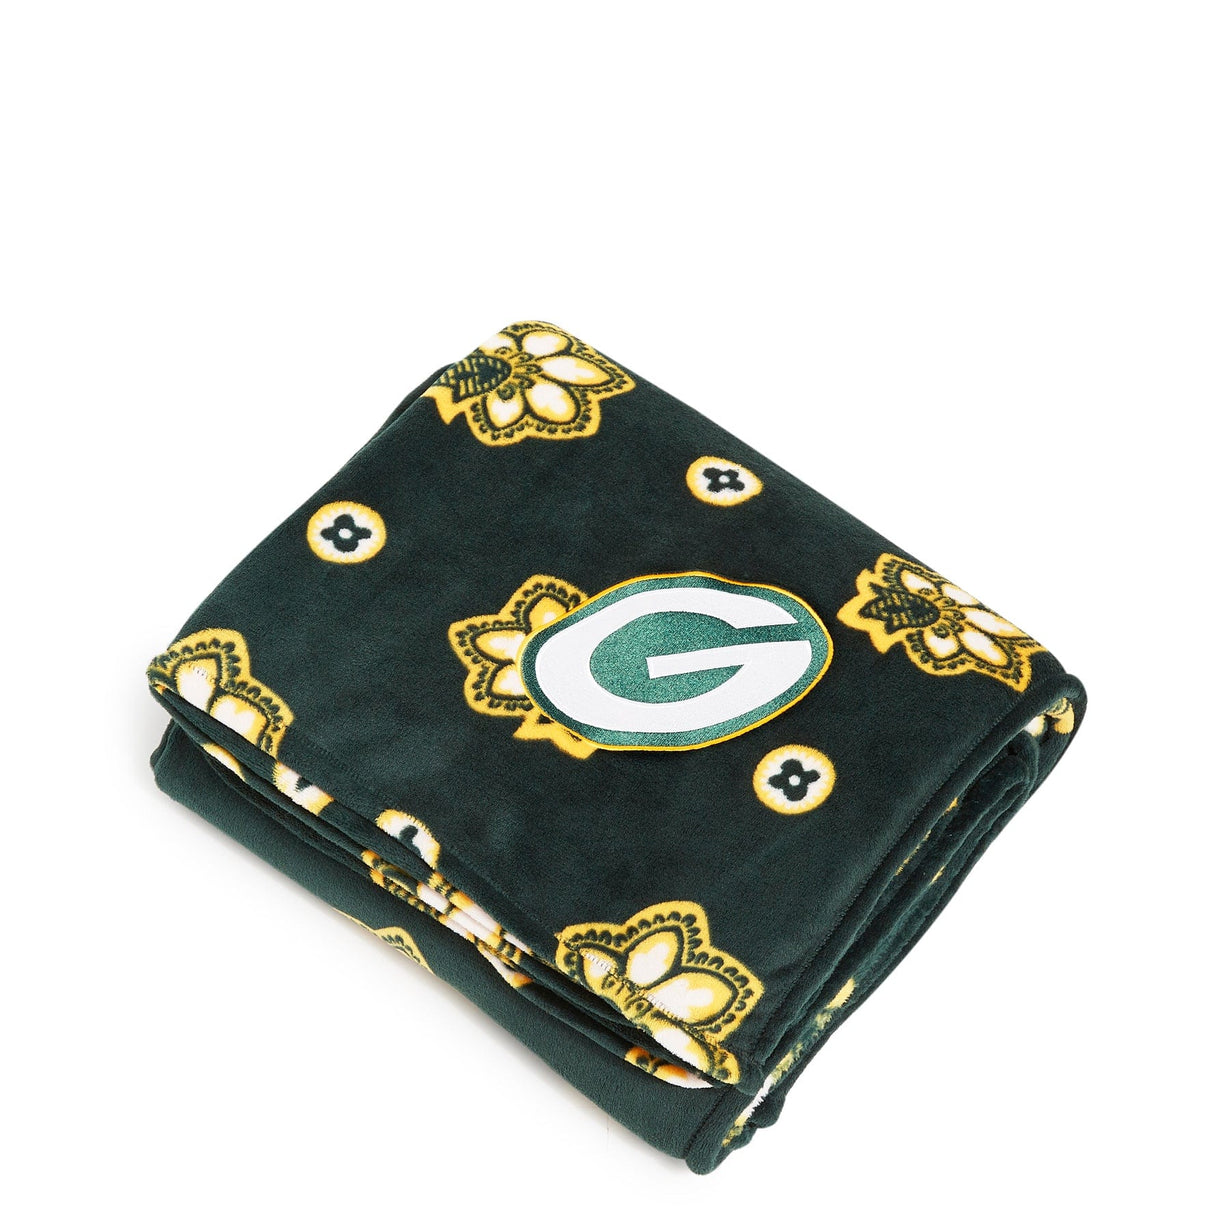 Green Bay Packers Embroidered Billfold Wallet